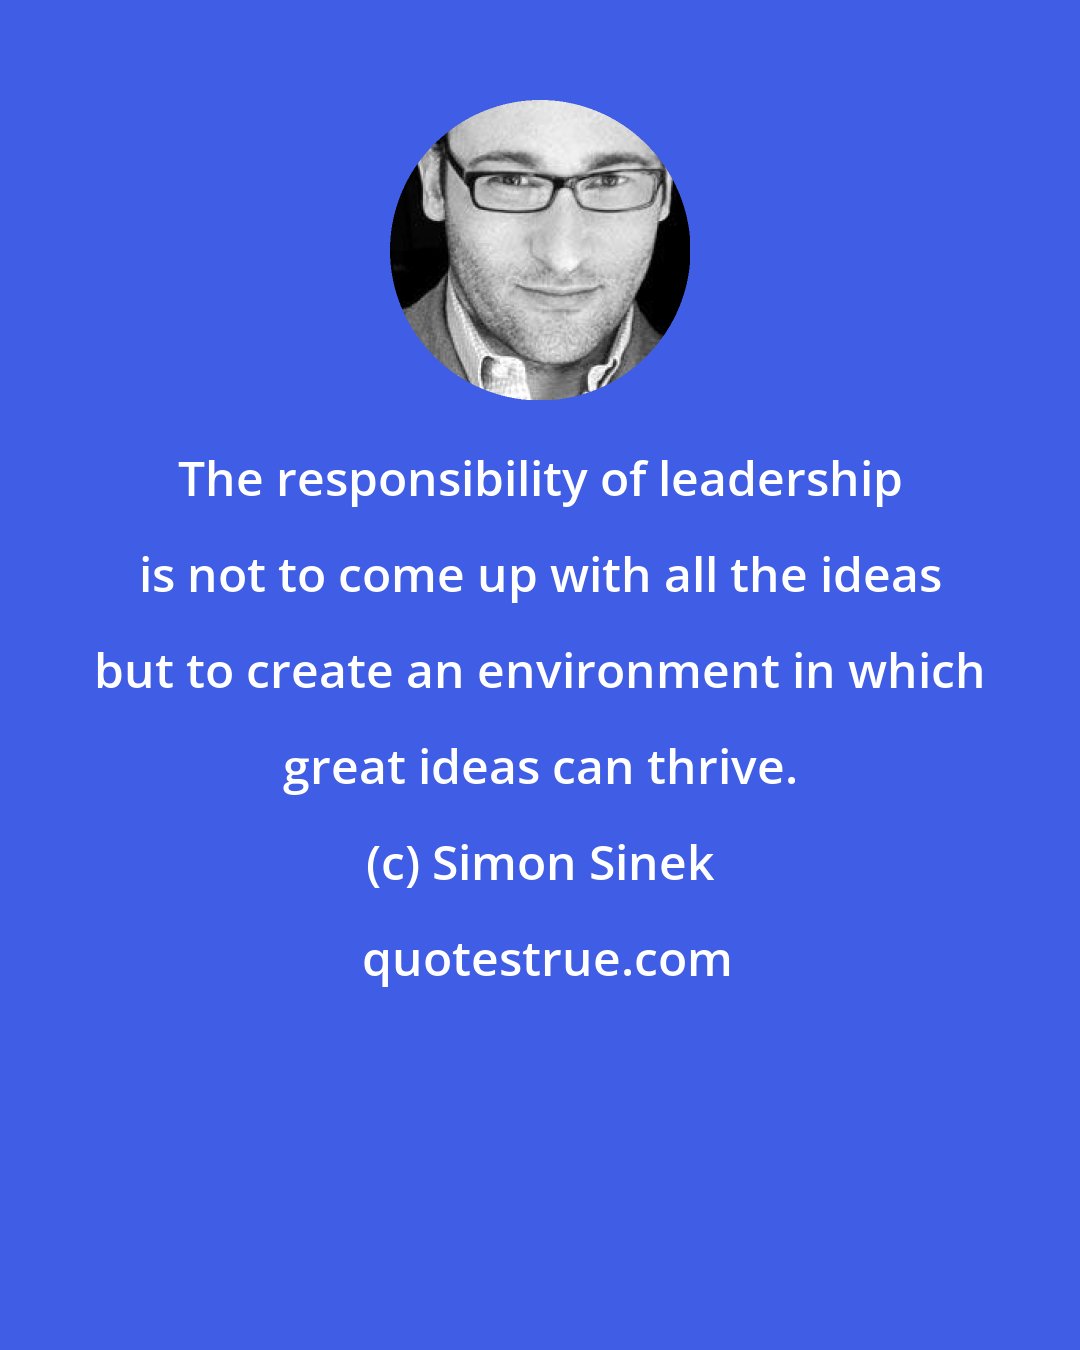 Simon Sinek: The responsibility of leadership is not to come up with all the ideas but to create an environment in which great ideas can thrive.